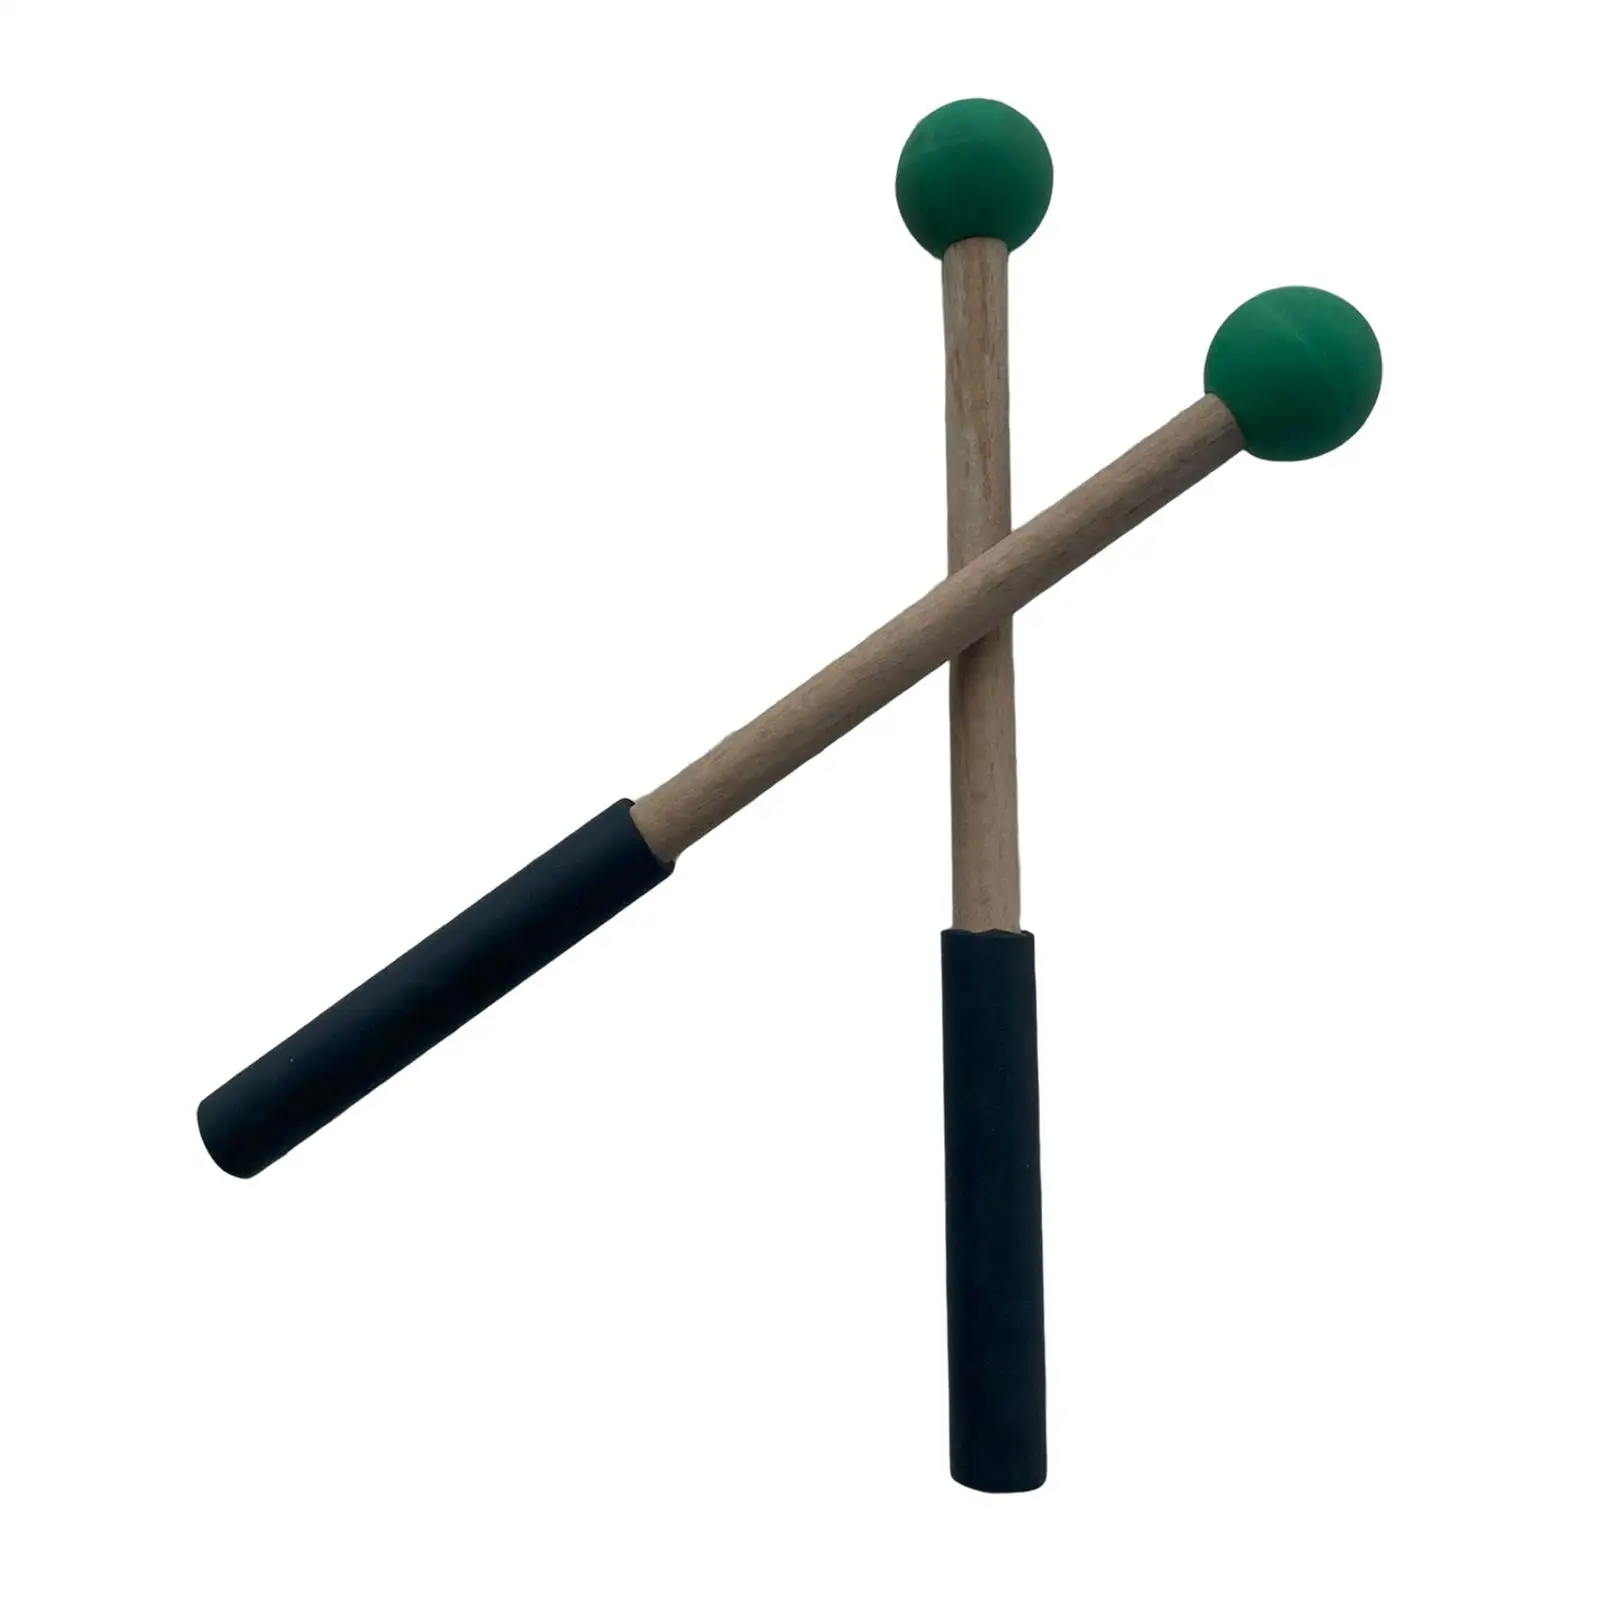 2 Pieces Classic Silicone Drumsticks Hand Percussion Mallets Cymbal Mallet